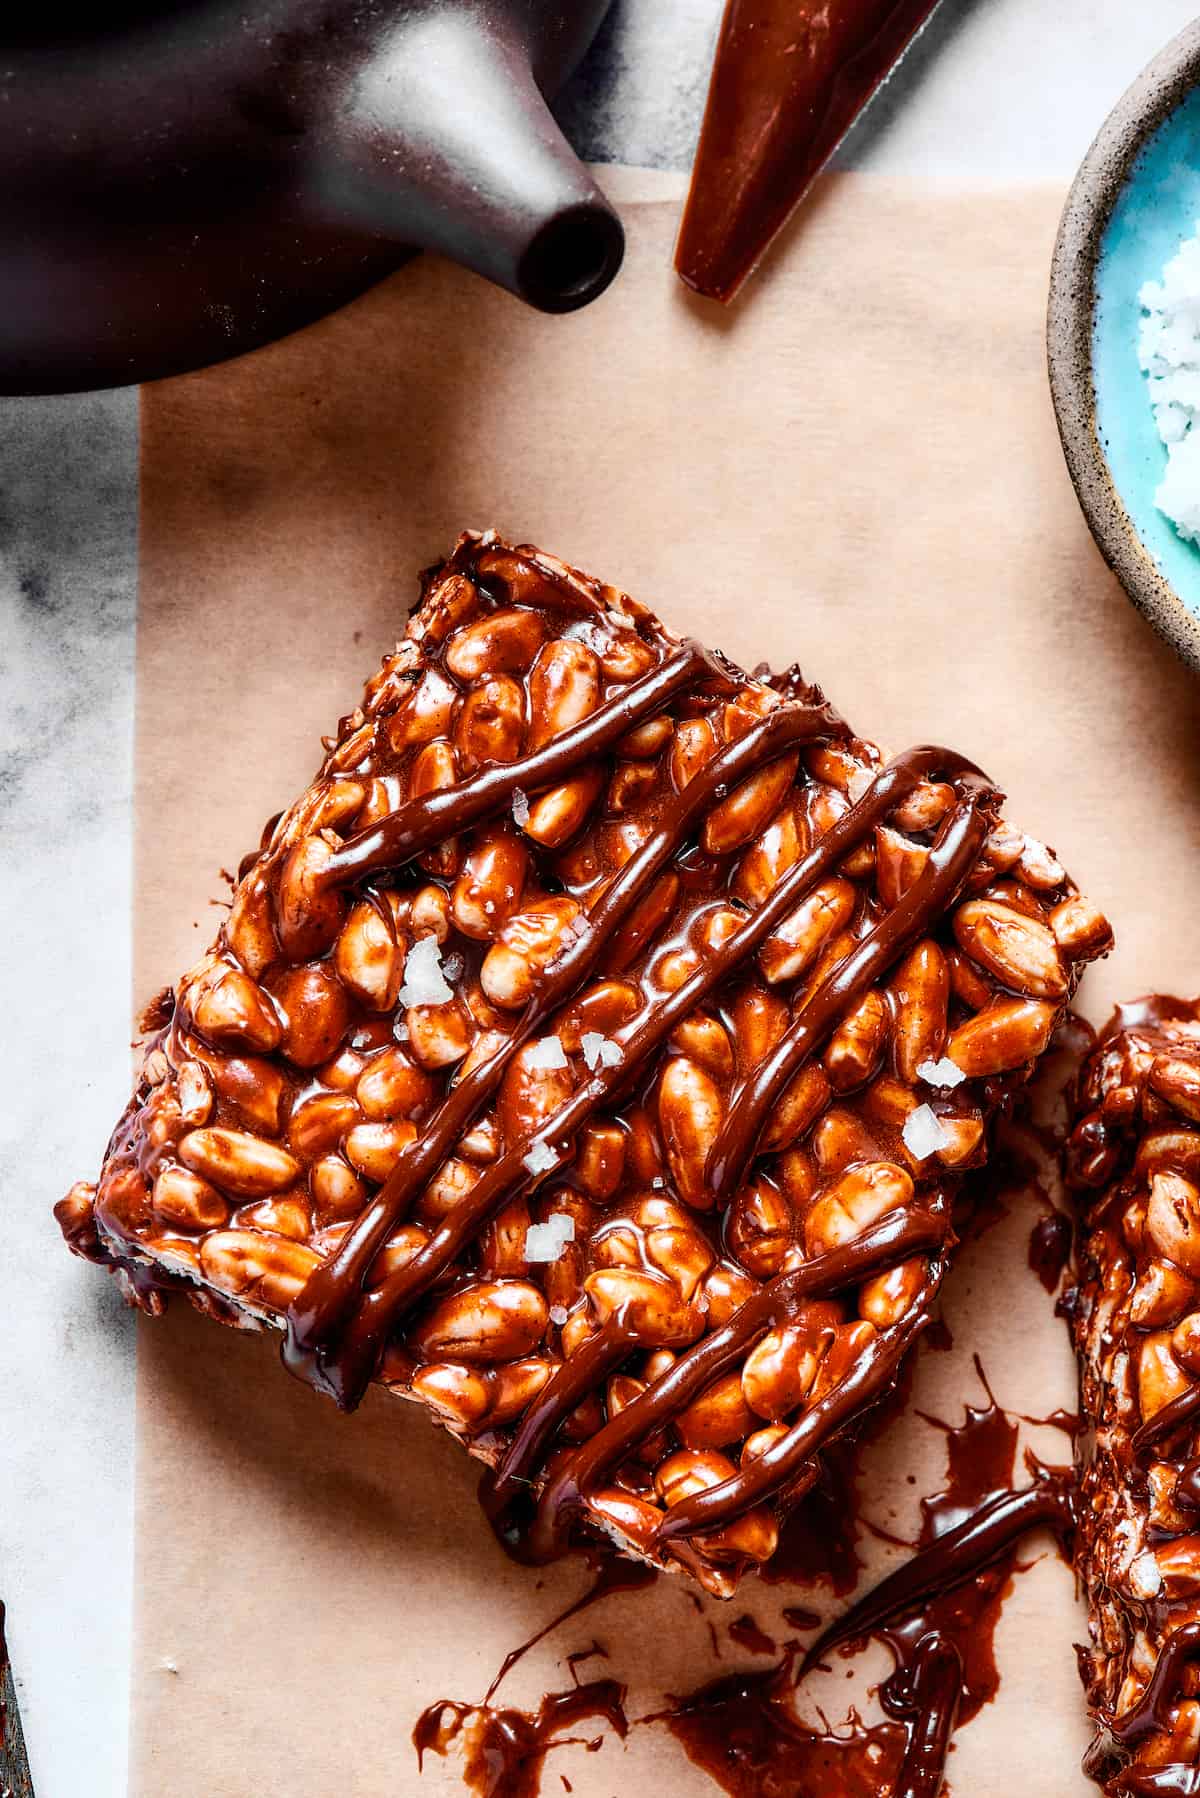 A chocolate rice and marshmallow square with chocolate drizzle.